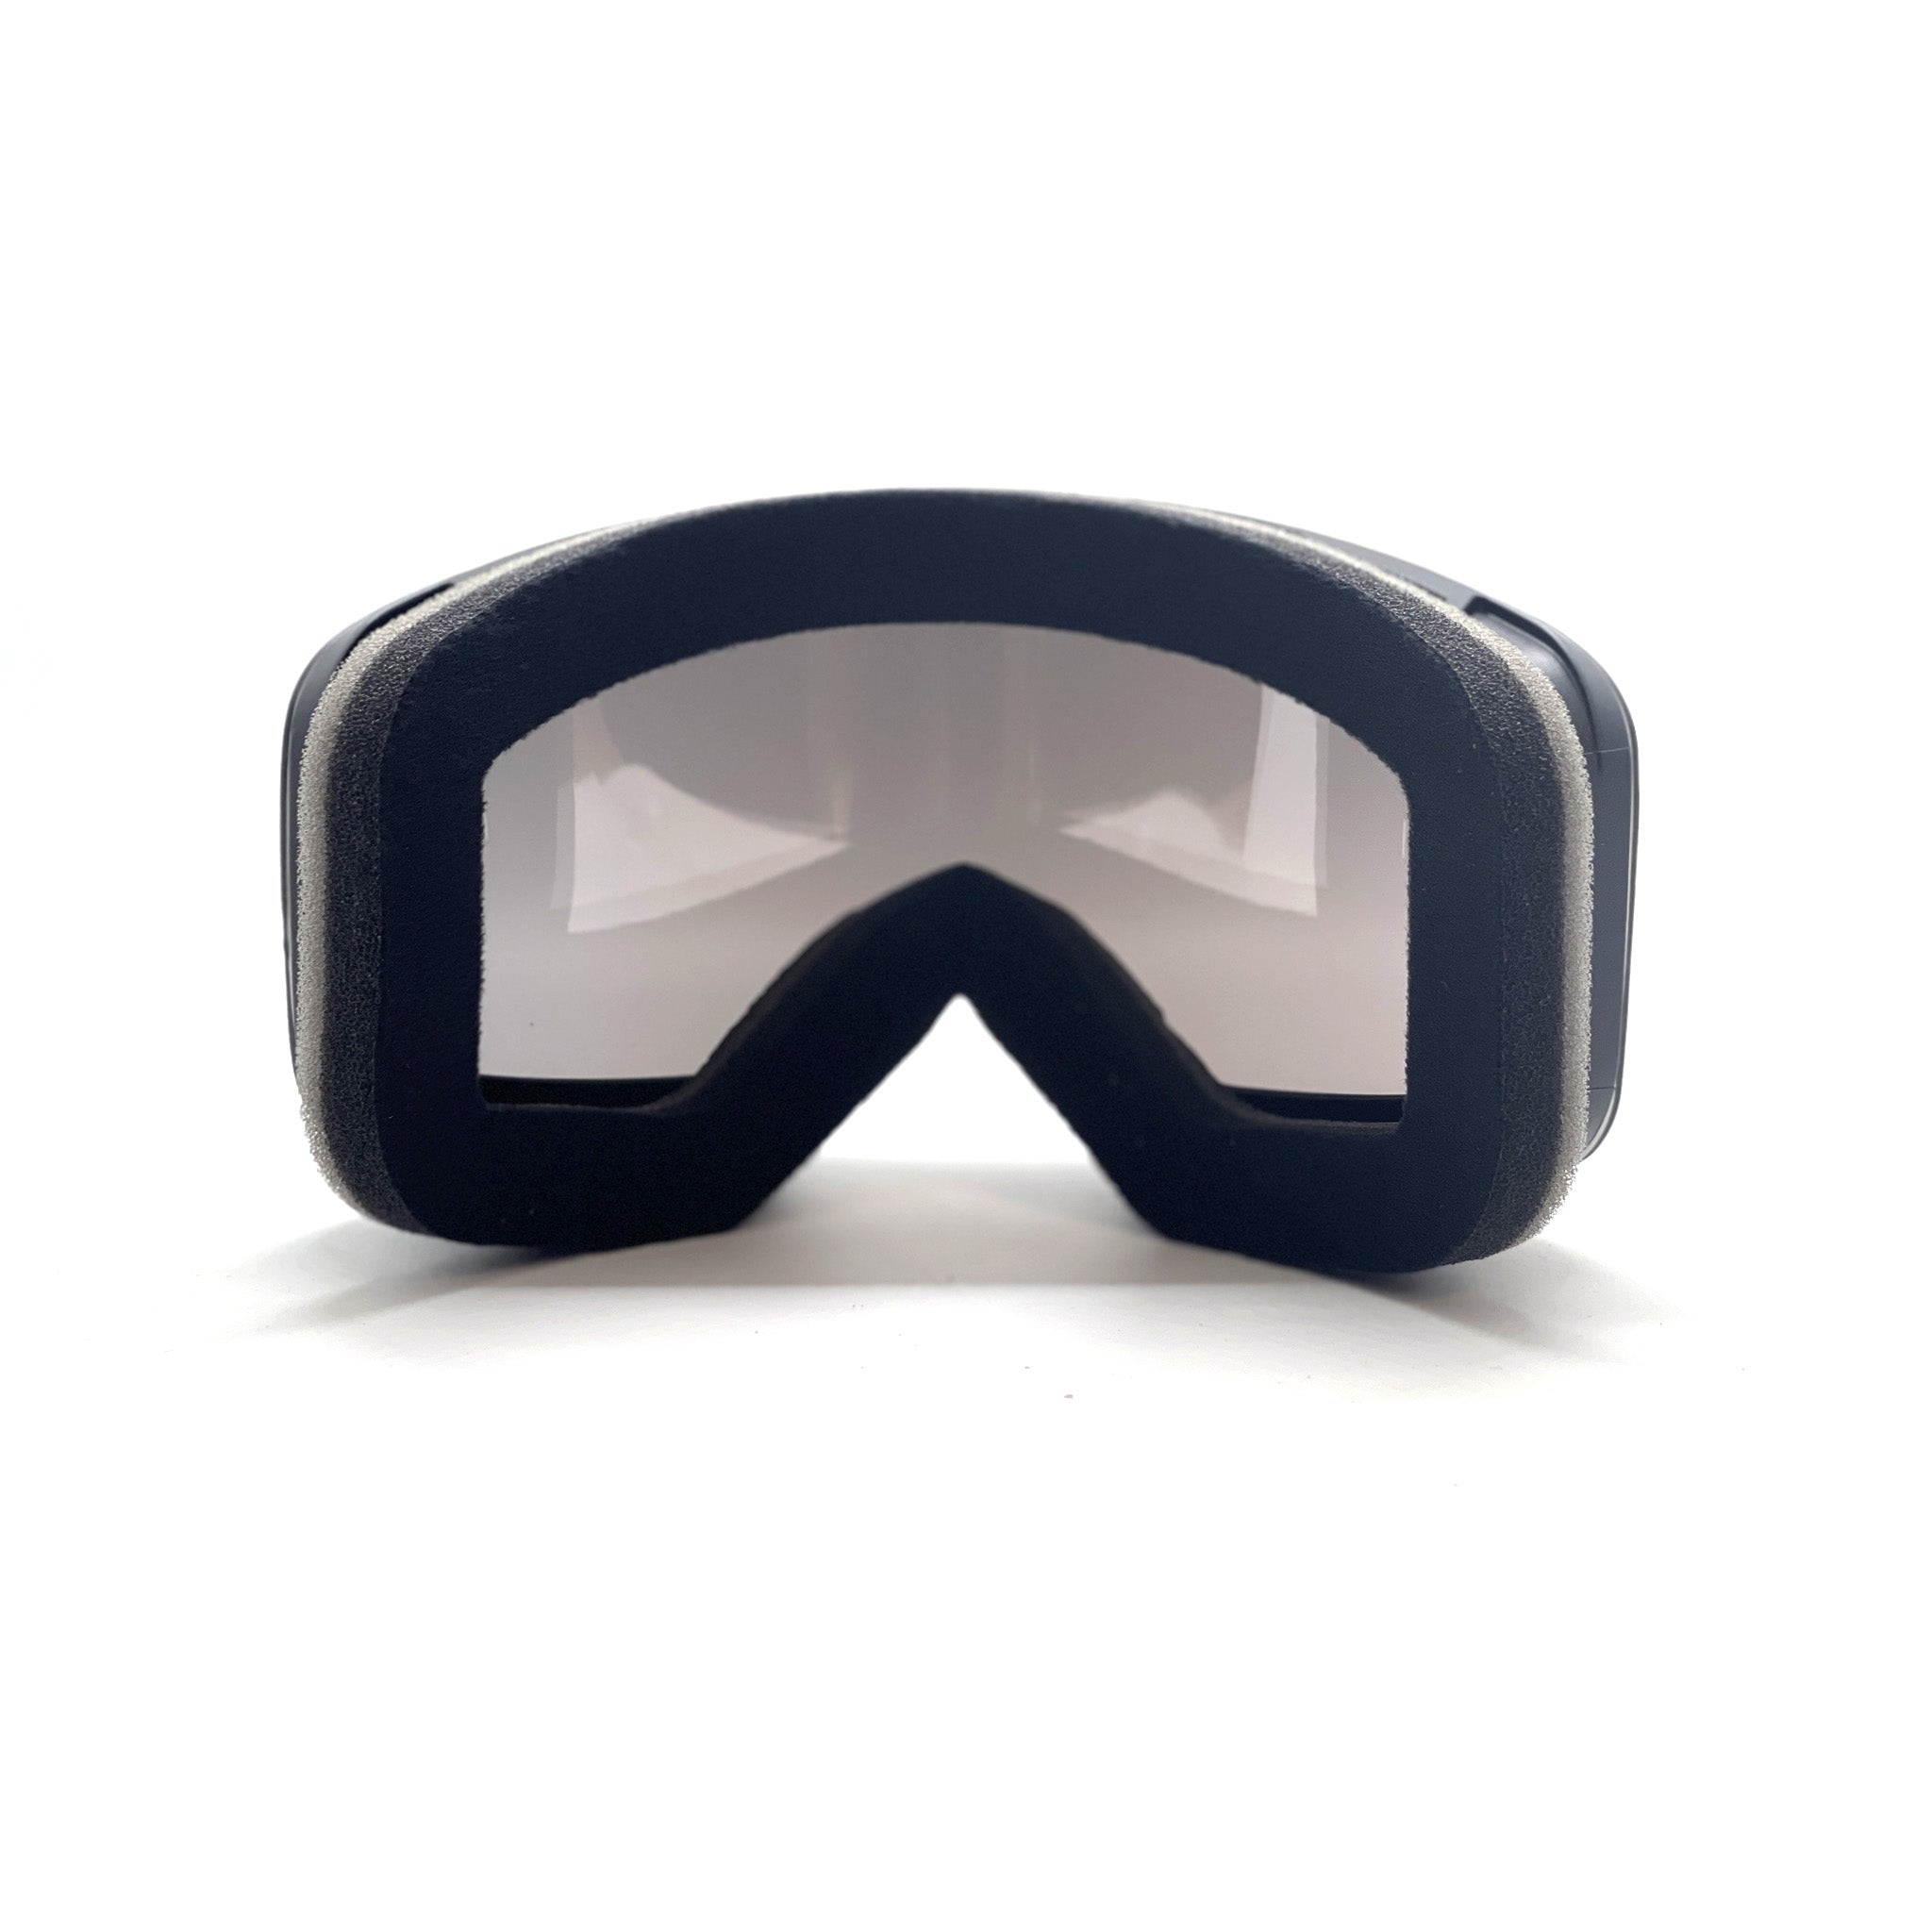 The STAGE Propnetic Magnetic Ski Goggle features ultra-soft triple layer foam for perfect fit and comfort while you are skiing.